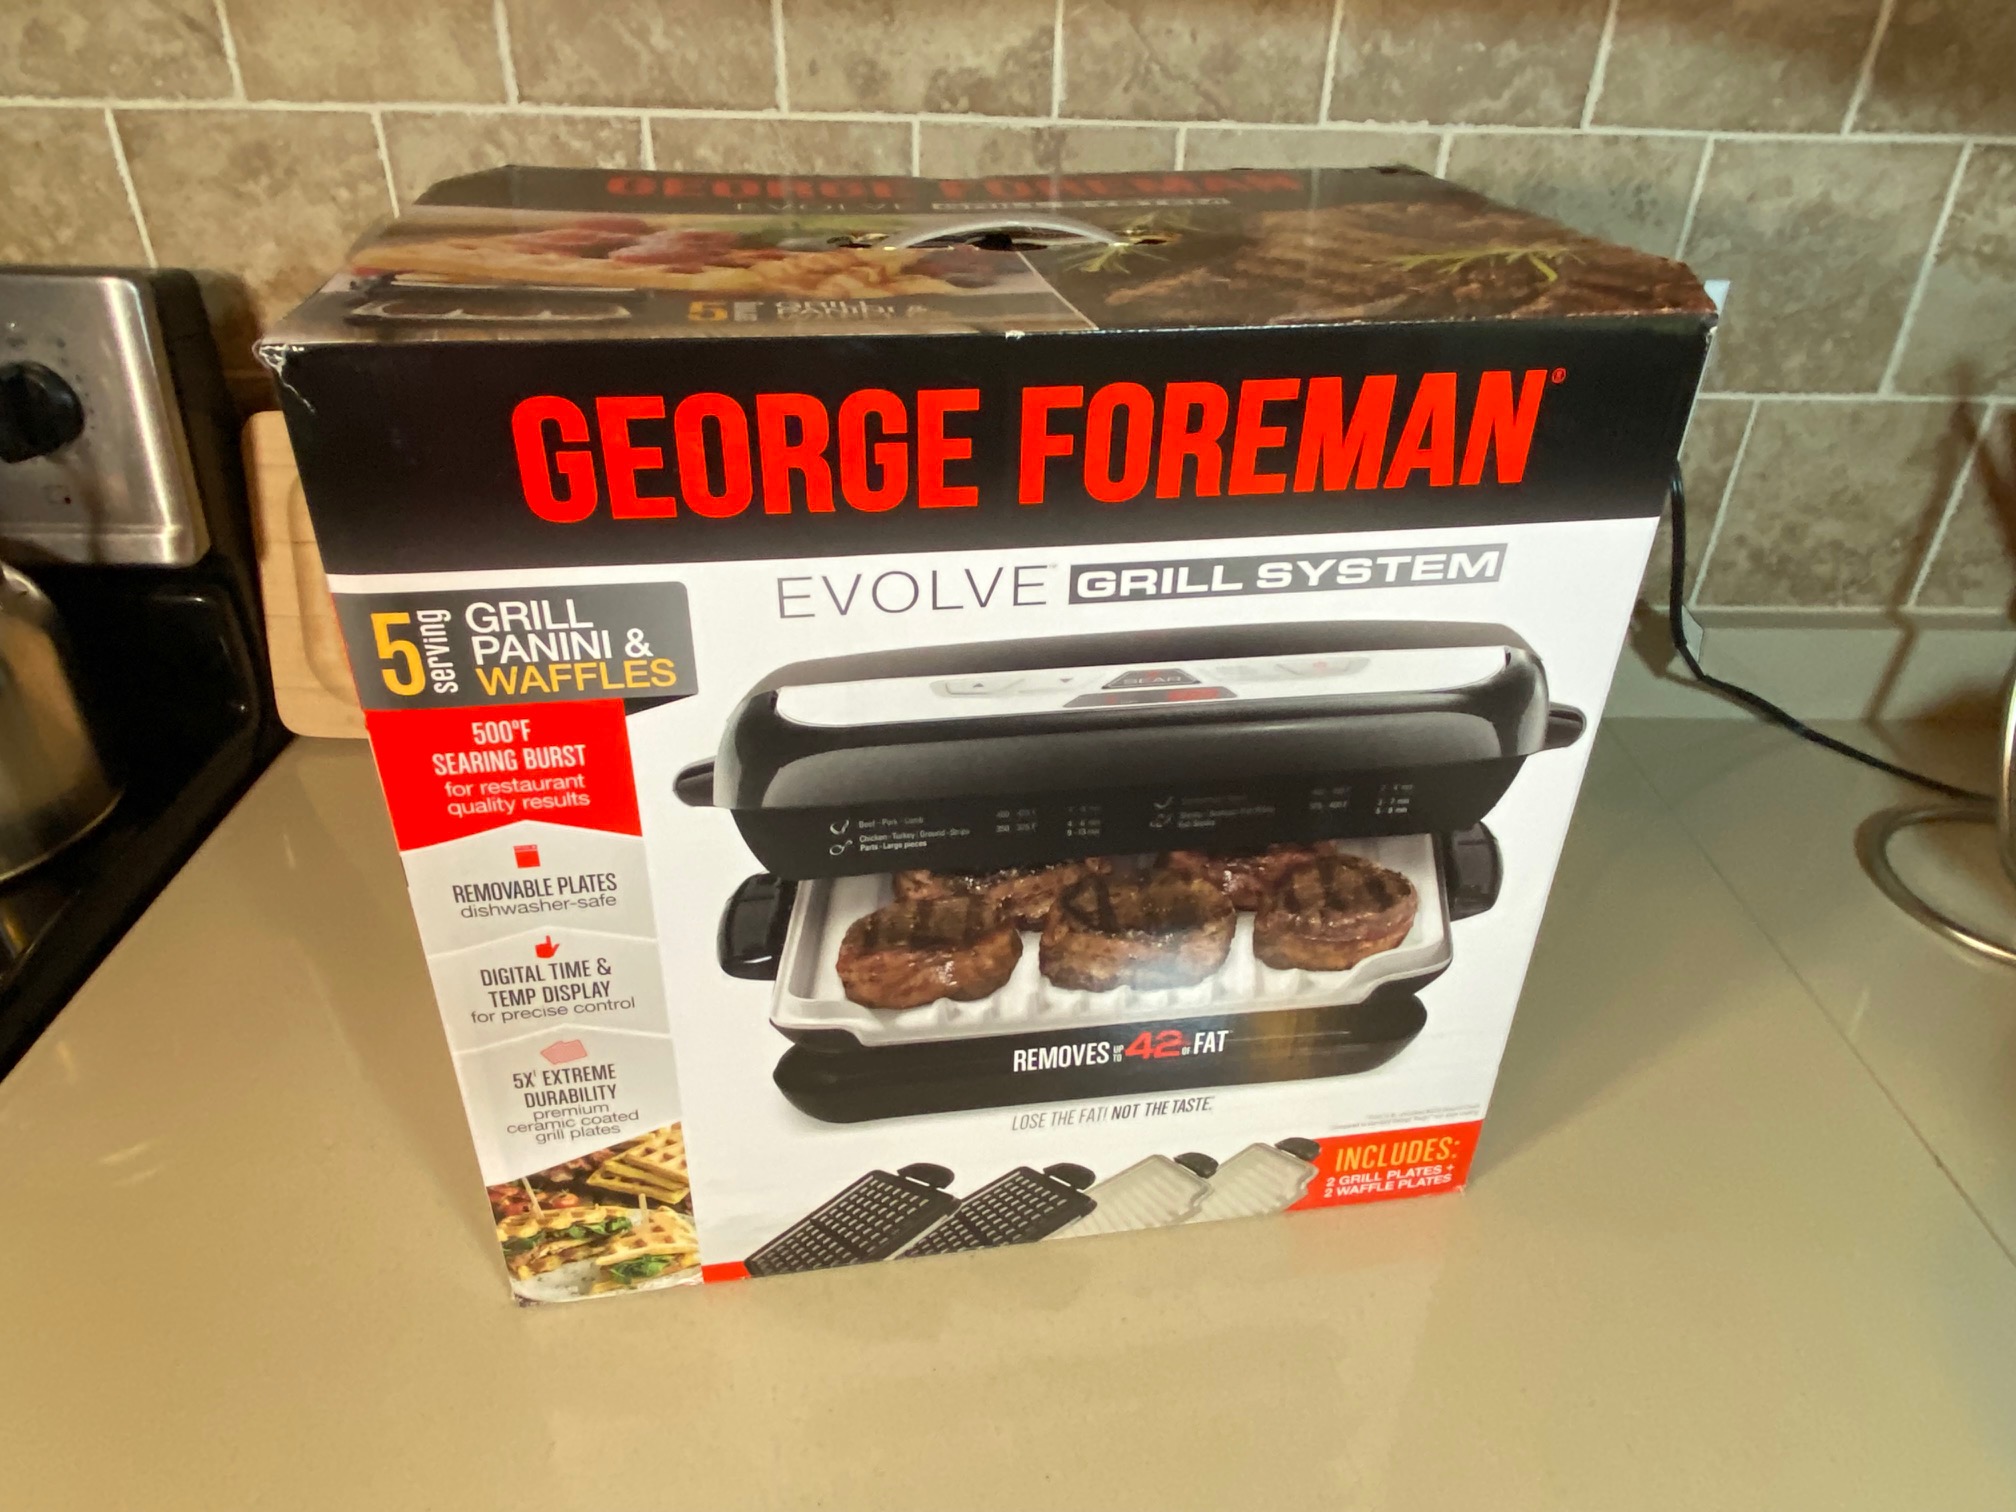 George Foreman Evolve Grill System/Waffle Maker hits  low at $59  shipped